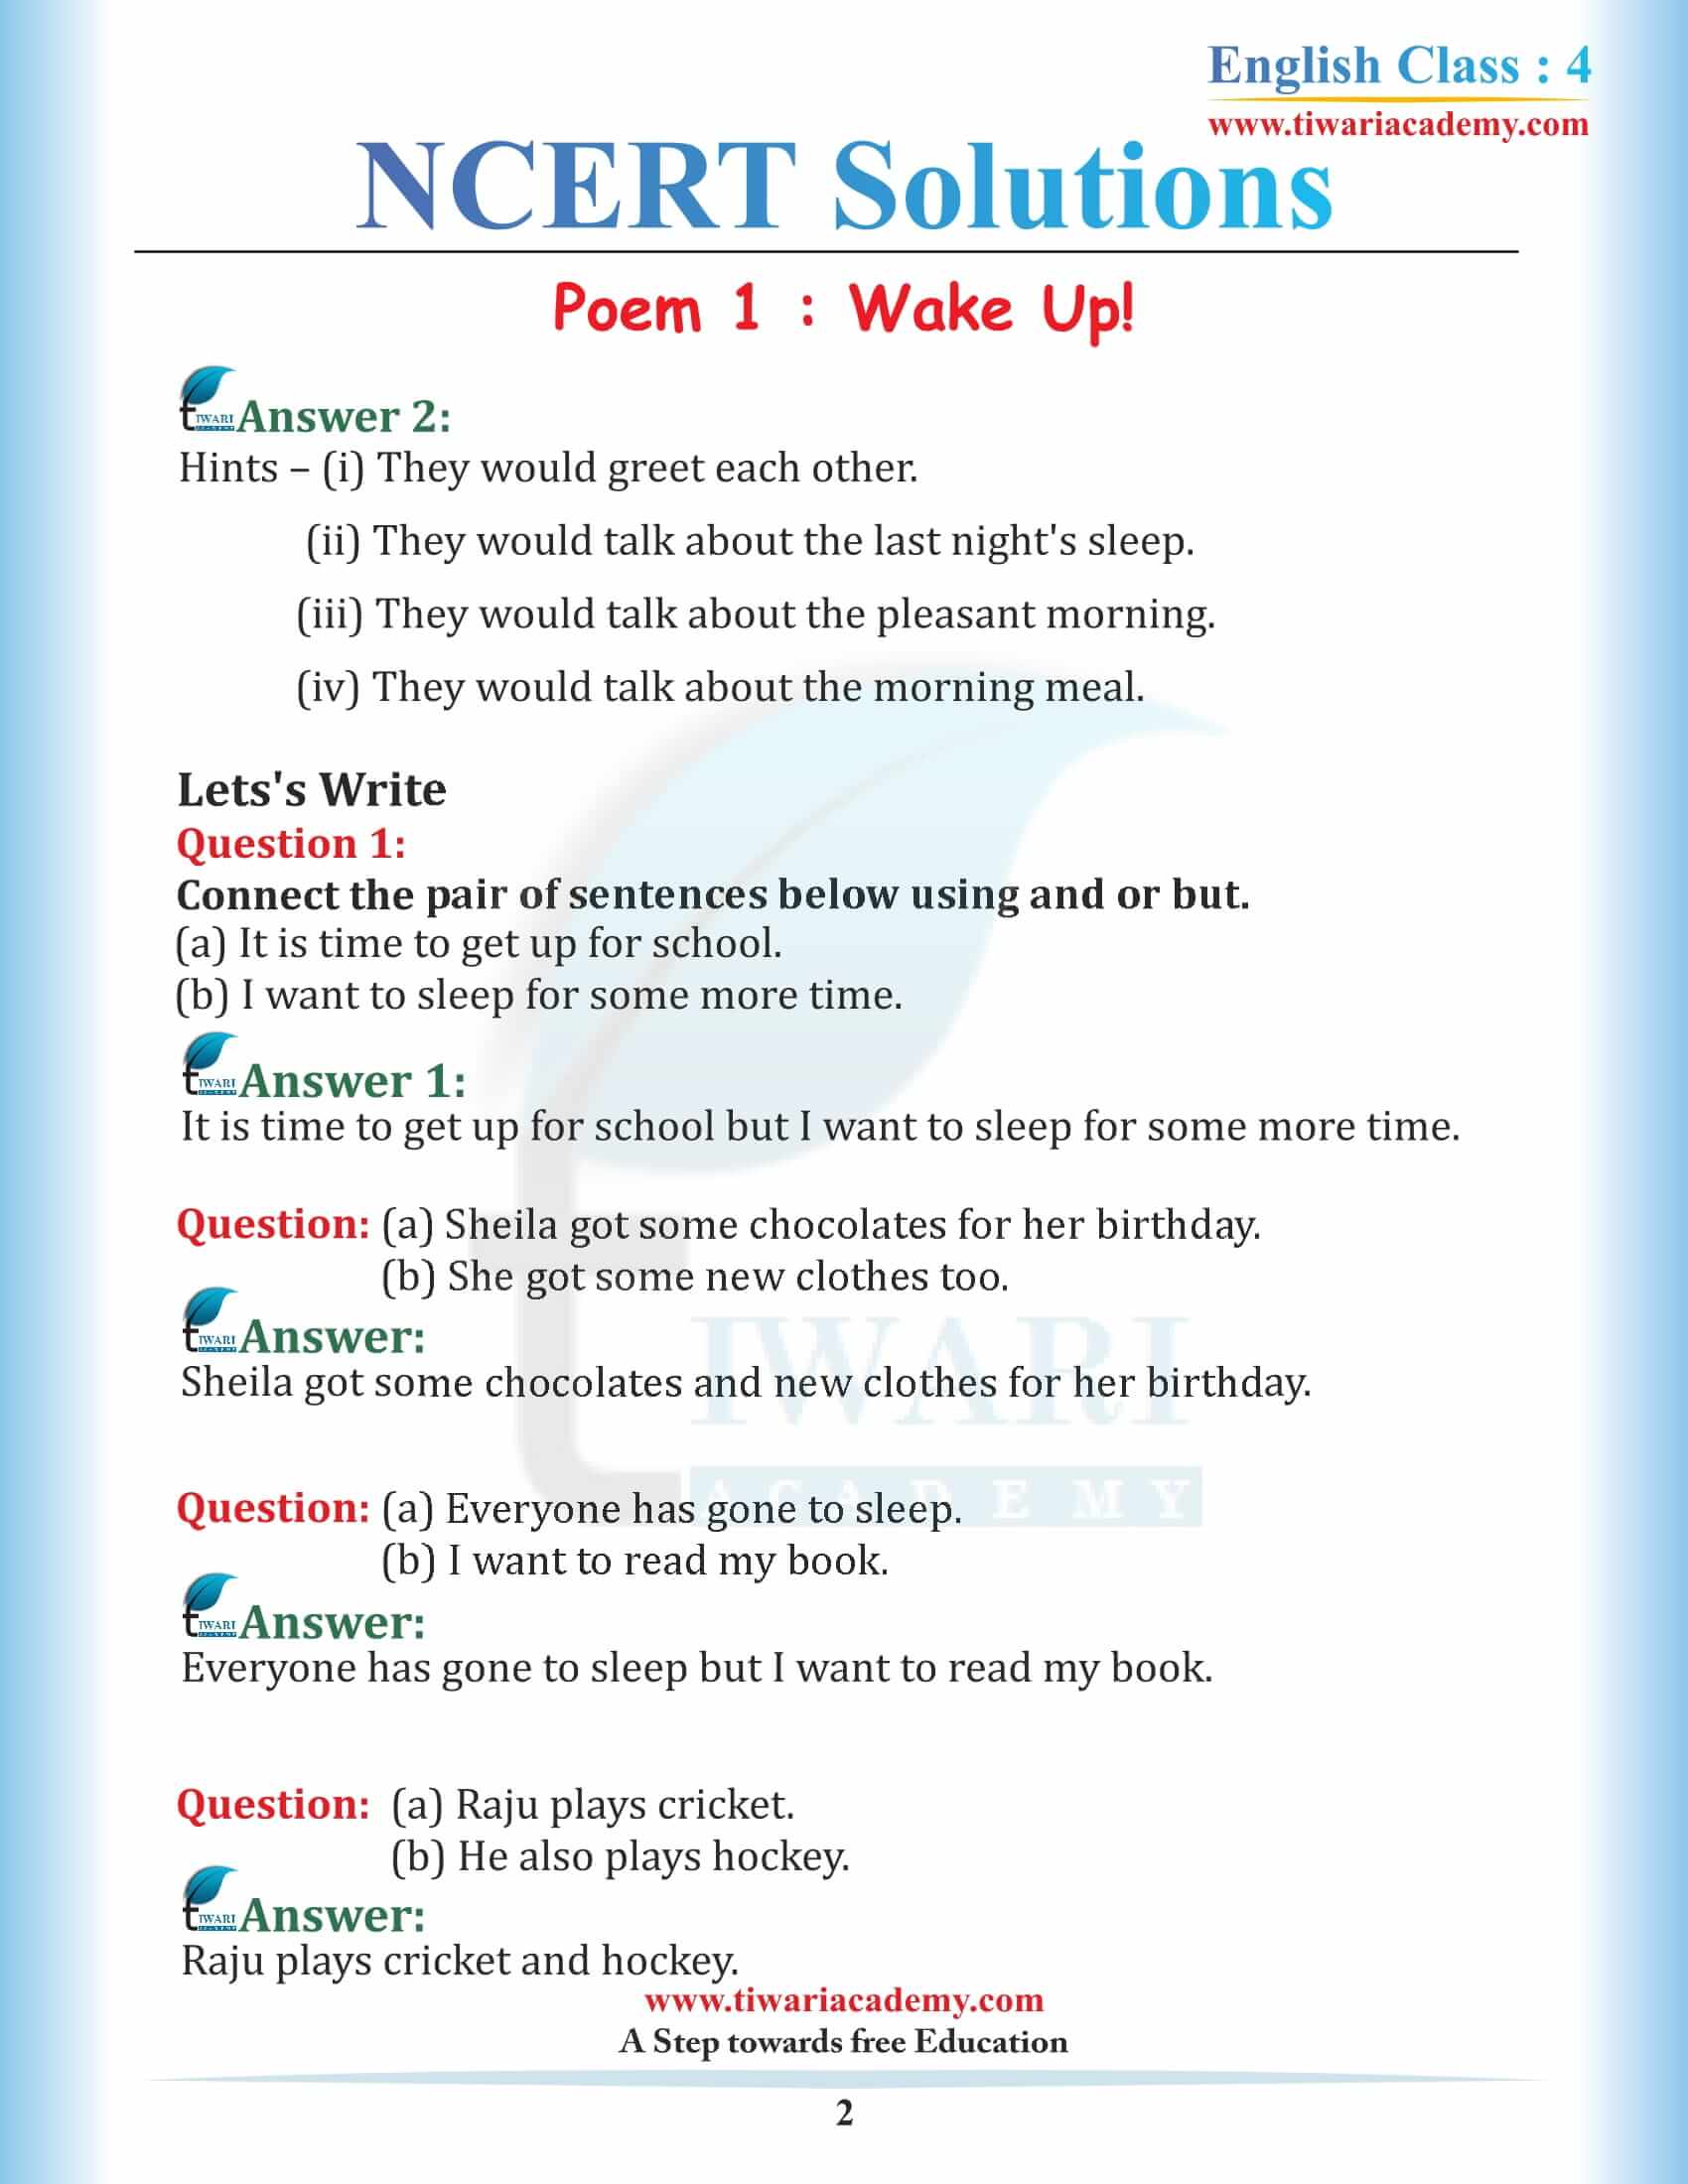 NCERT Solutions for Class 4 English Unit 1 Chapter 1